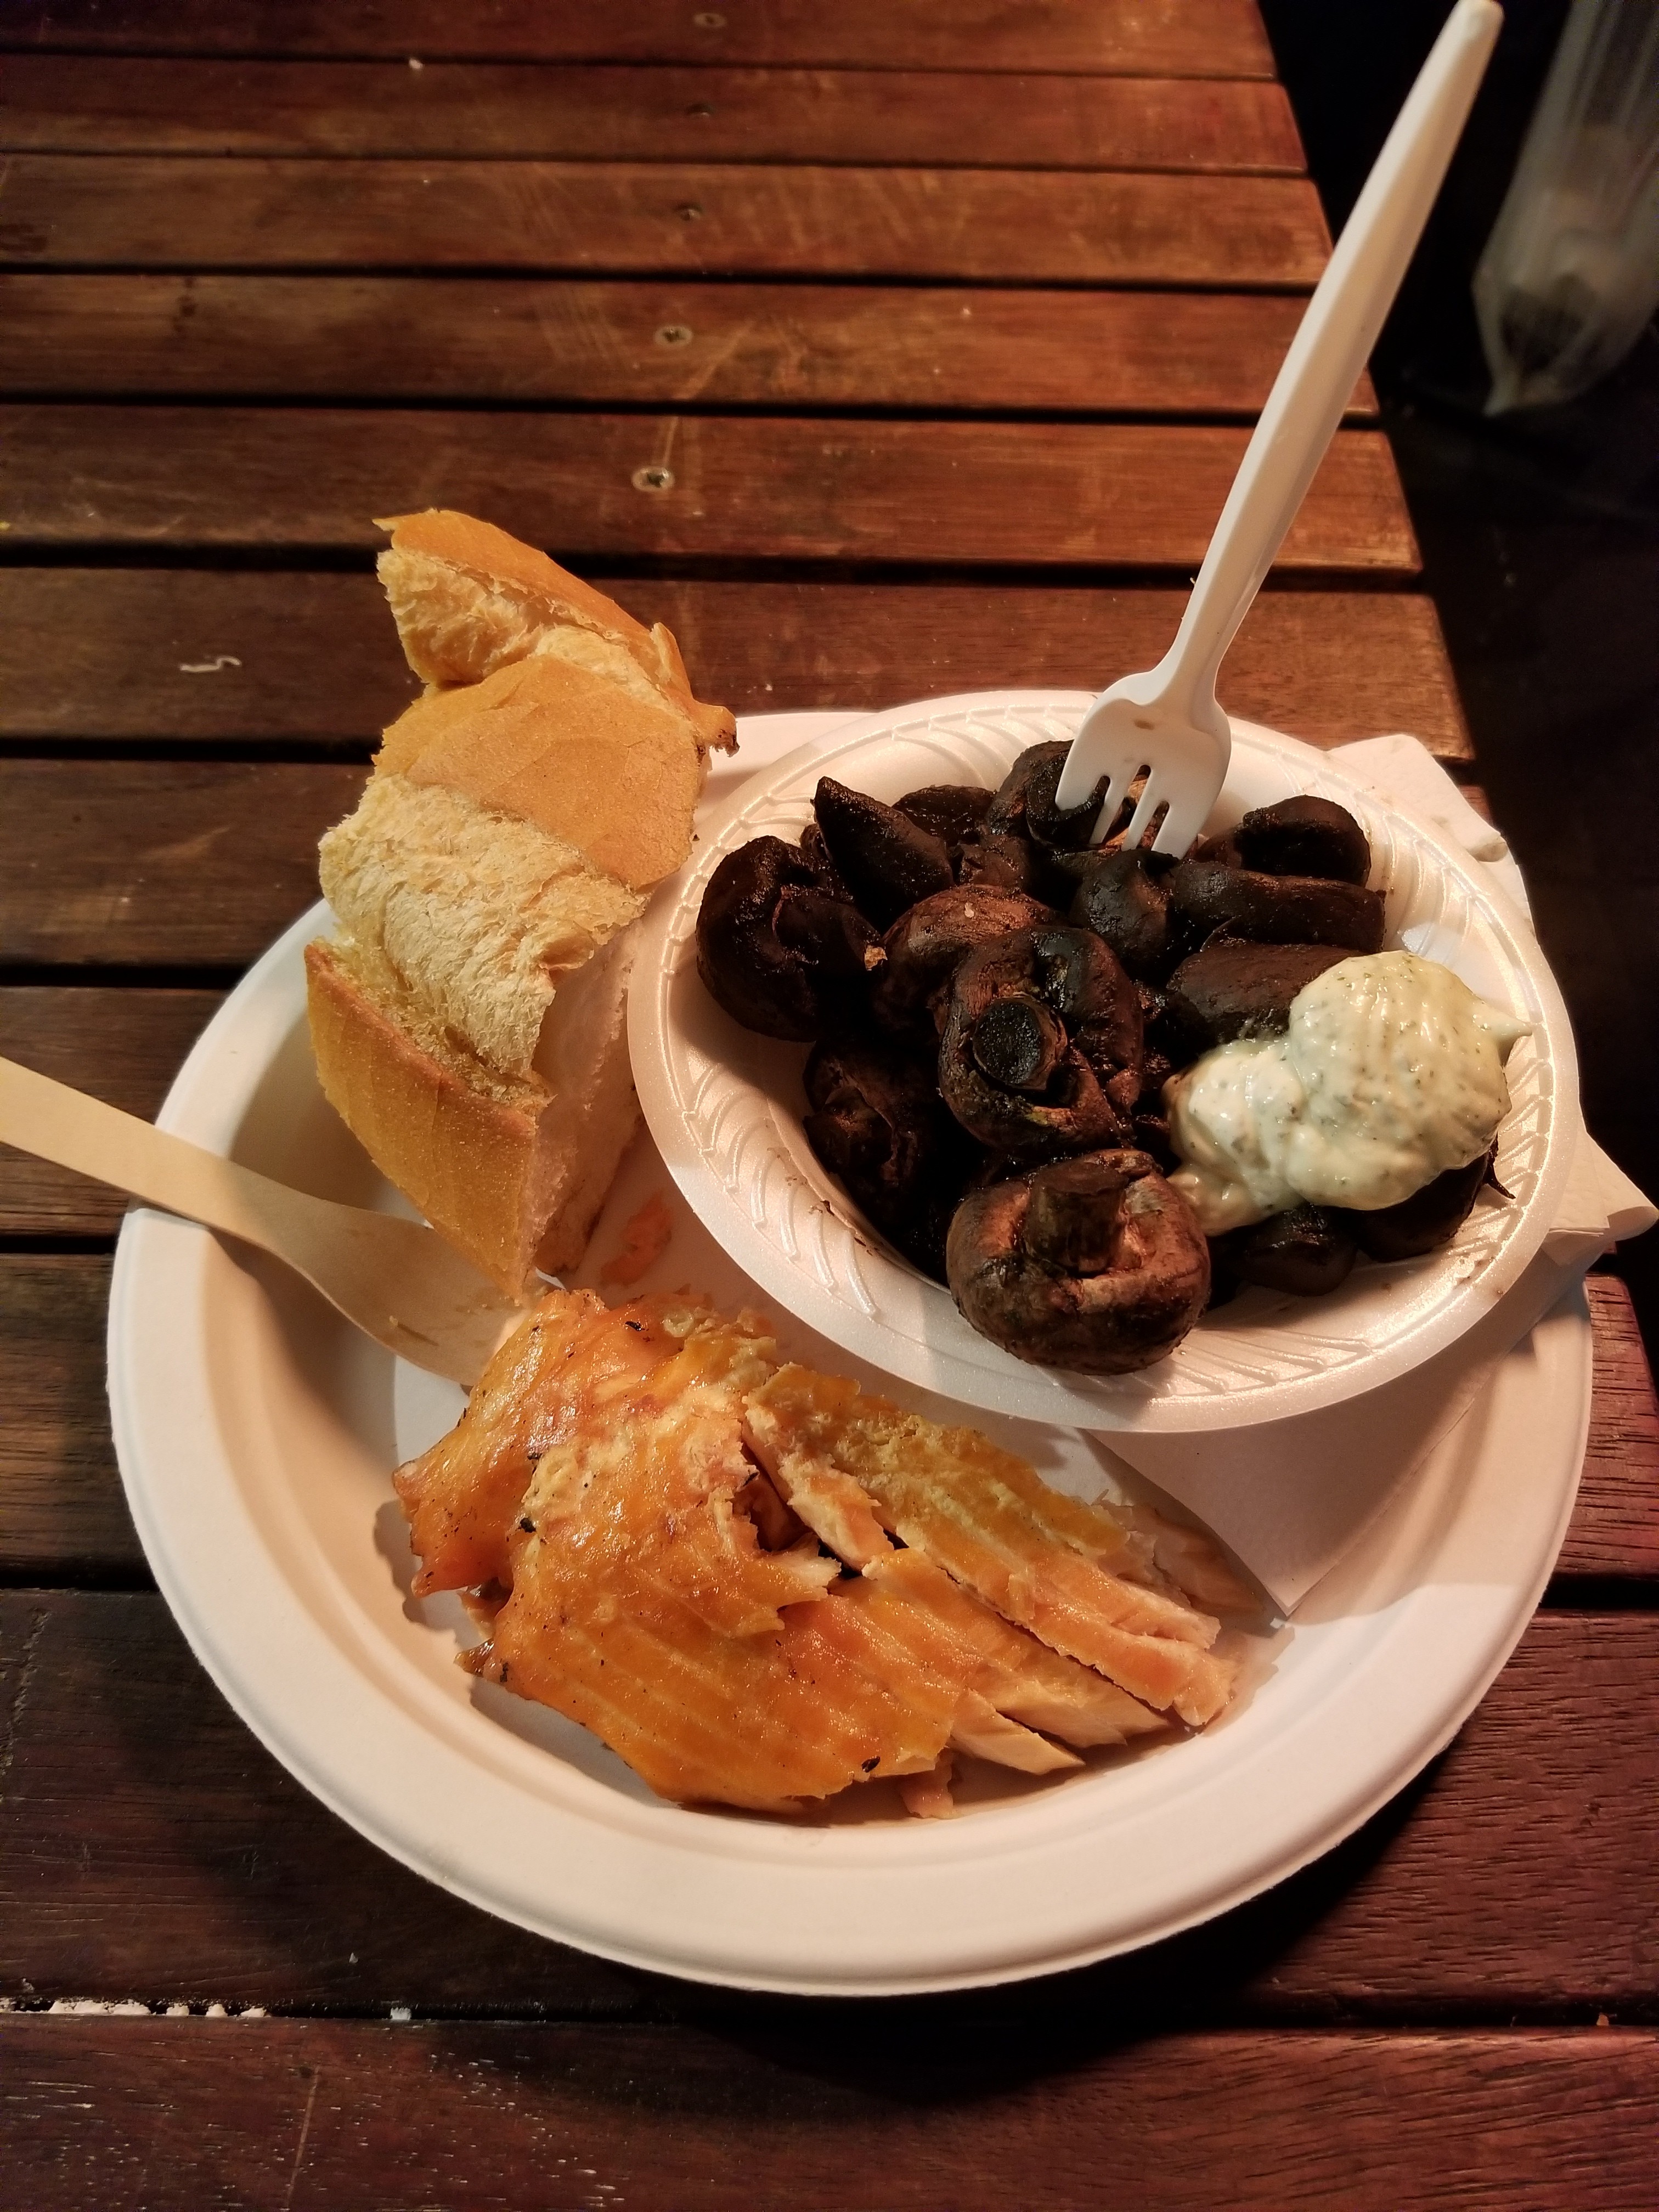 Styrofoam bowl of mushrooms on a paper plate with bread , salmon, and plastic cutlery